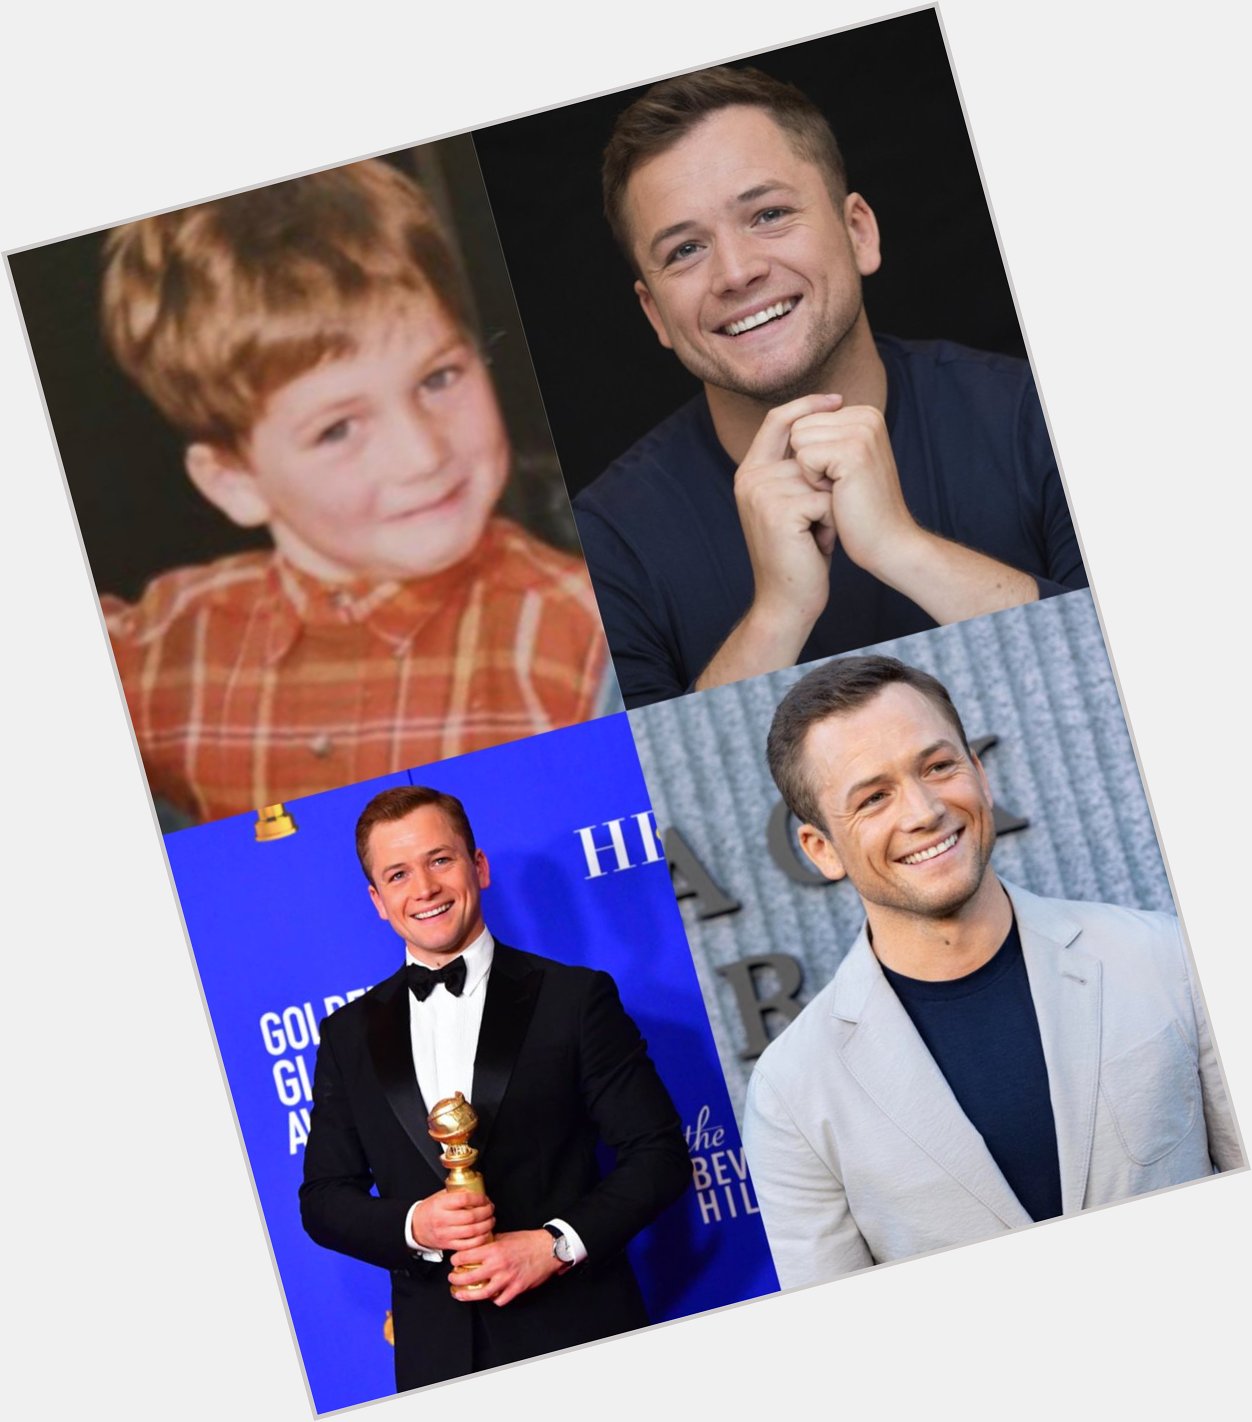 Happy Birthday, Taron Egerton!  Hope you have an amazing day, doing all the things that you love!

We love you!  